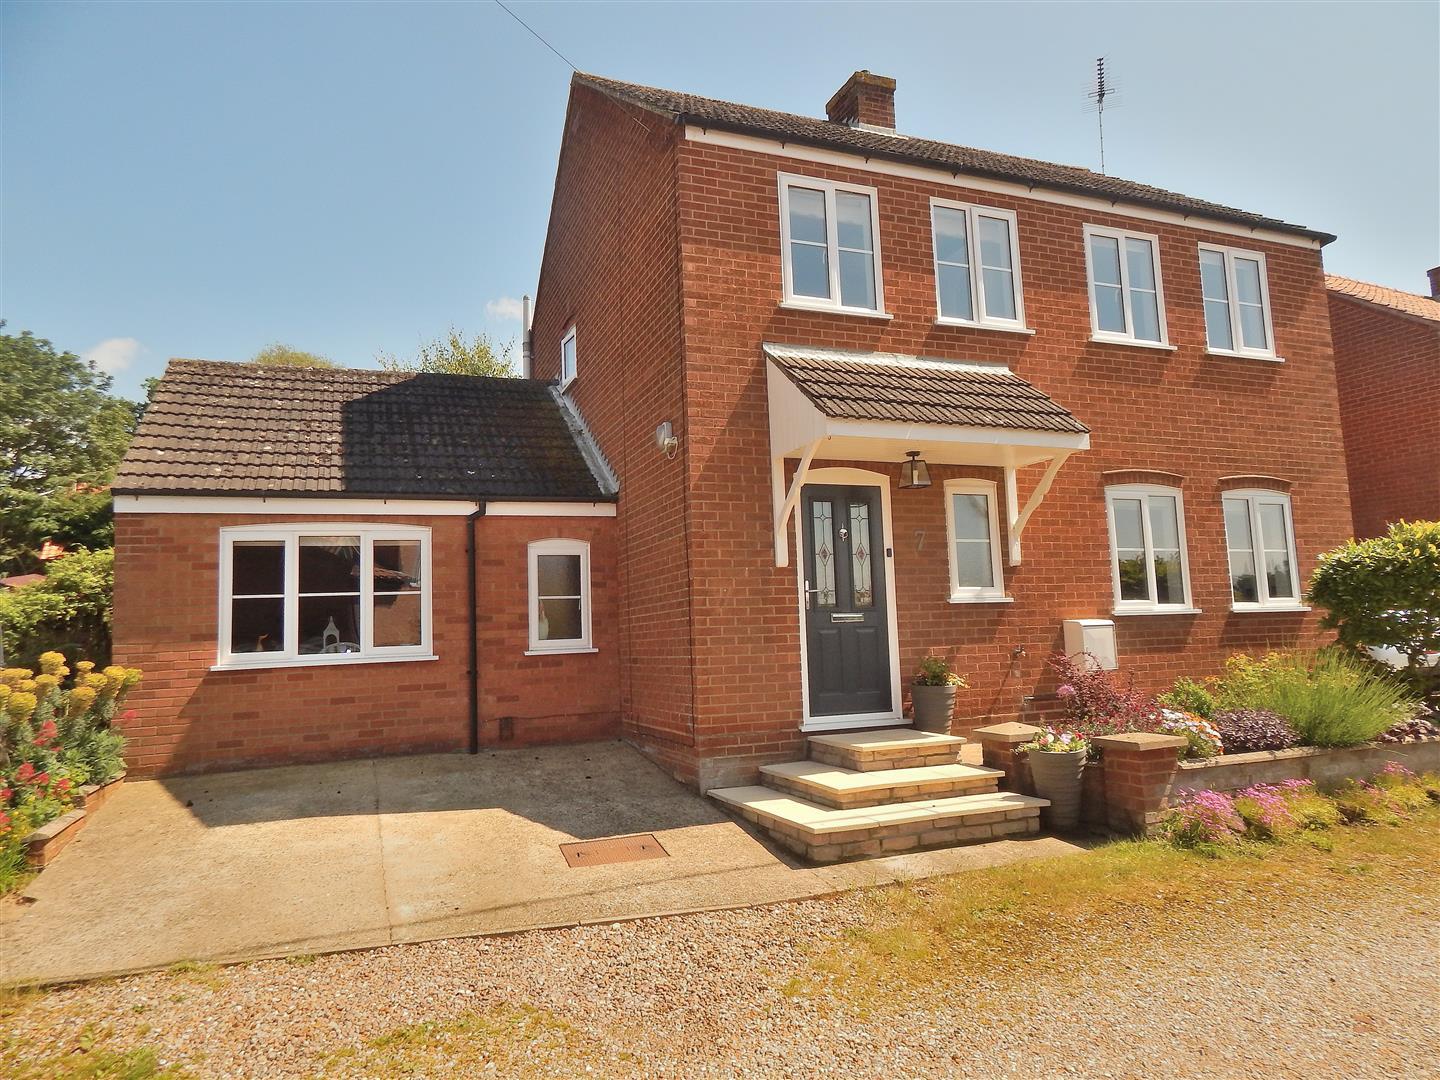 3 bed detached house for sale in Smithy Road, King's Lynn - Property Image 1